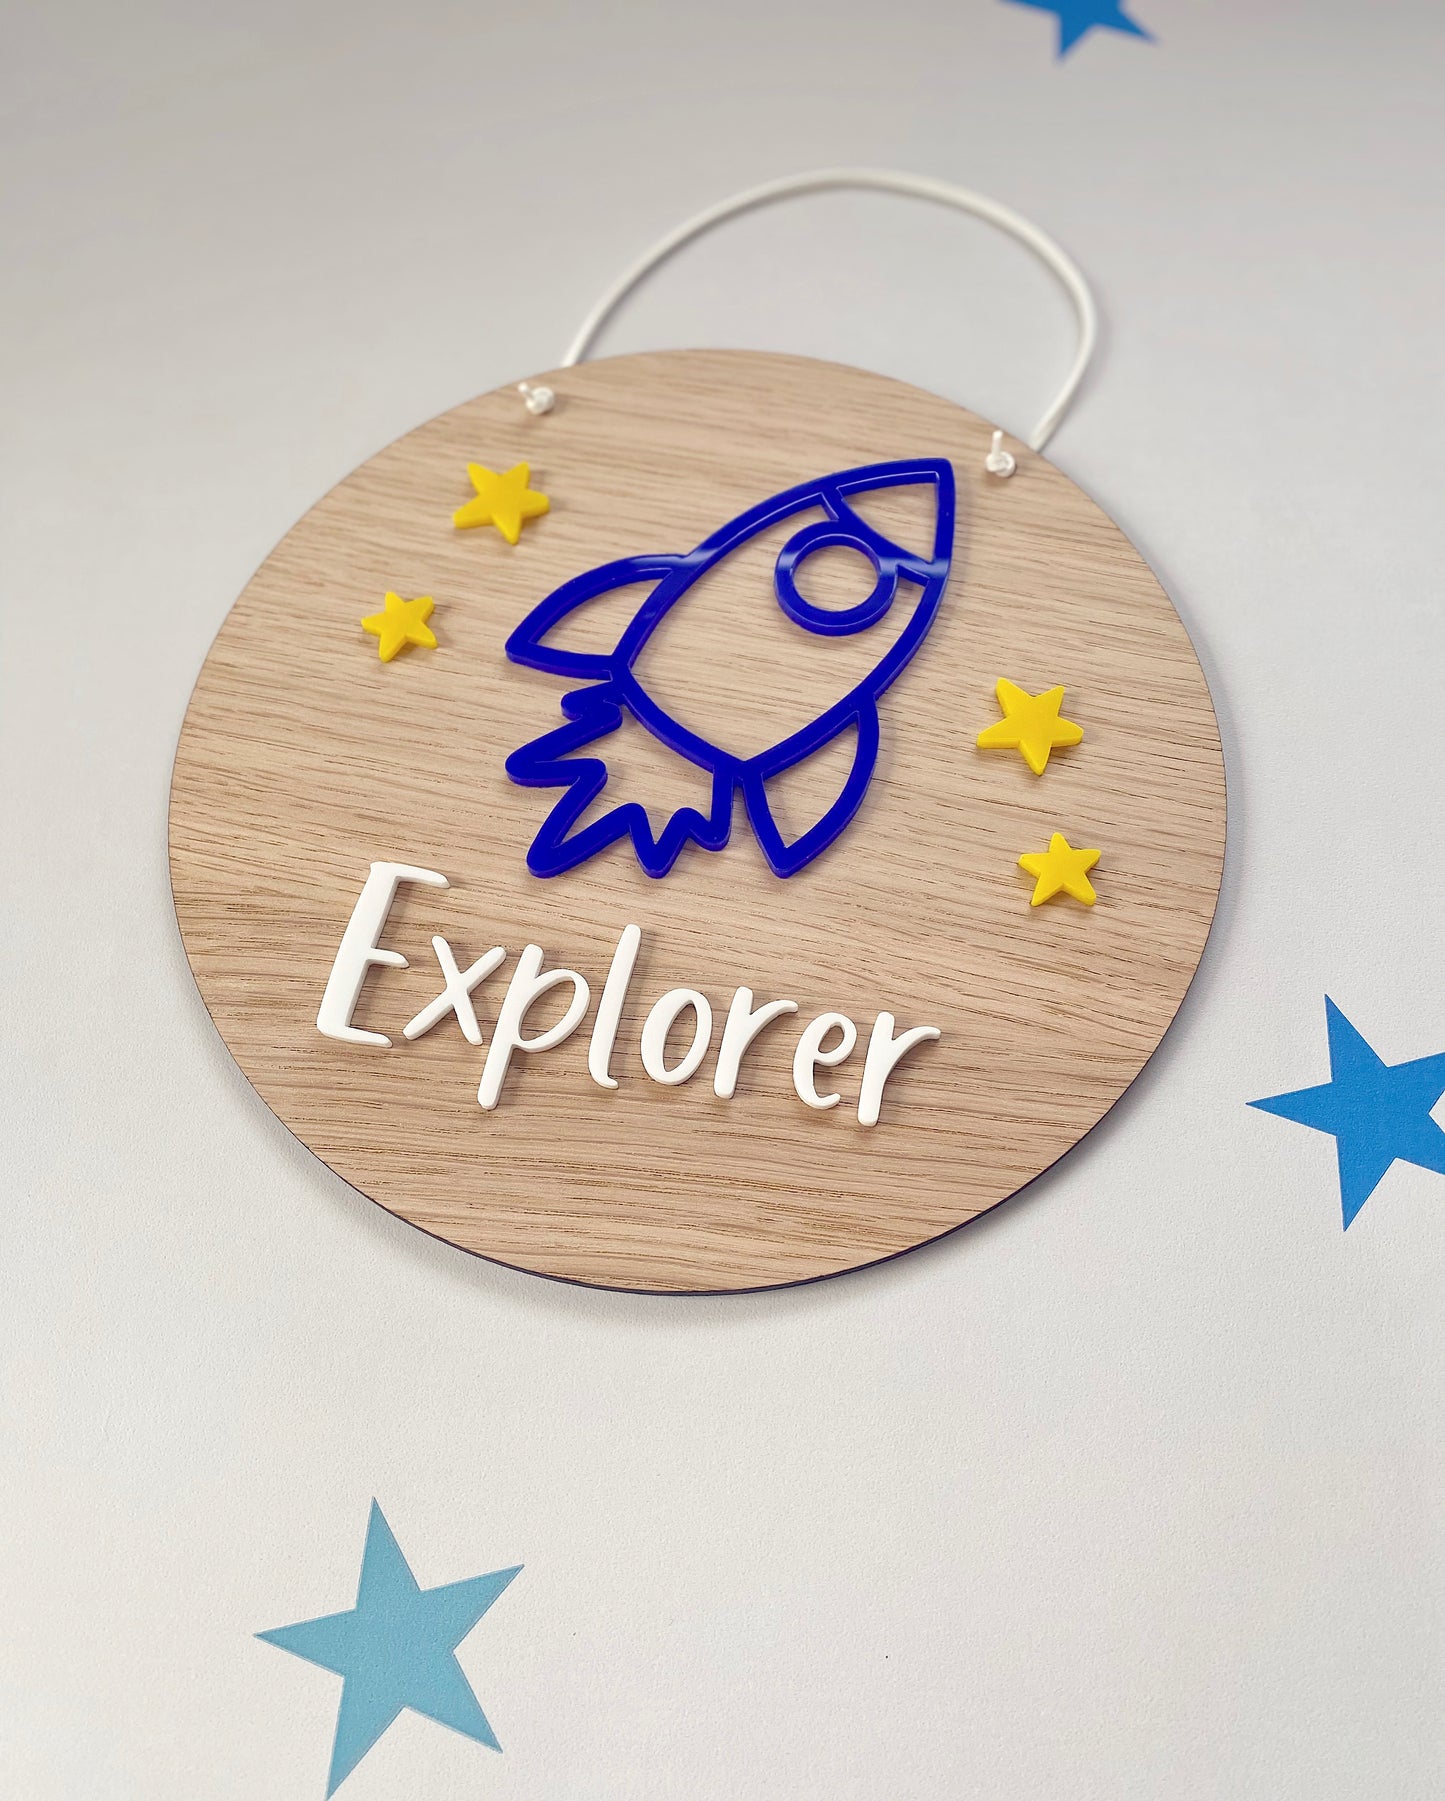 Wooden plaque with blue rocket and yellow stars. With the word Explorer written on